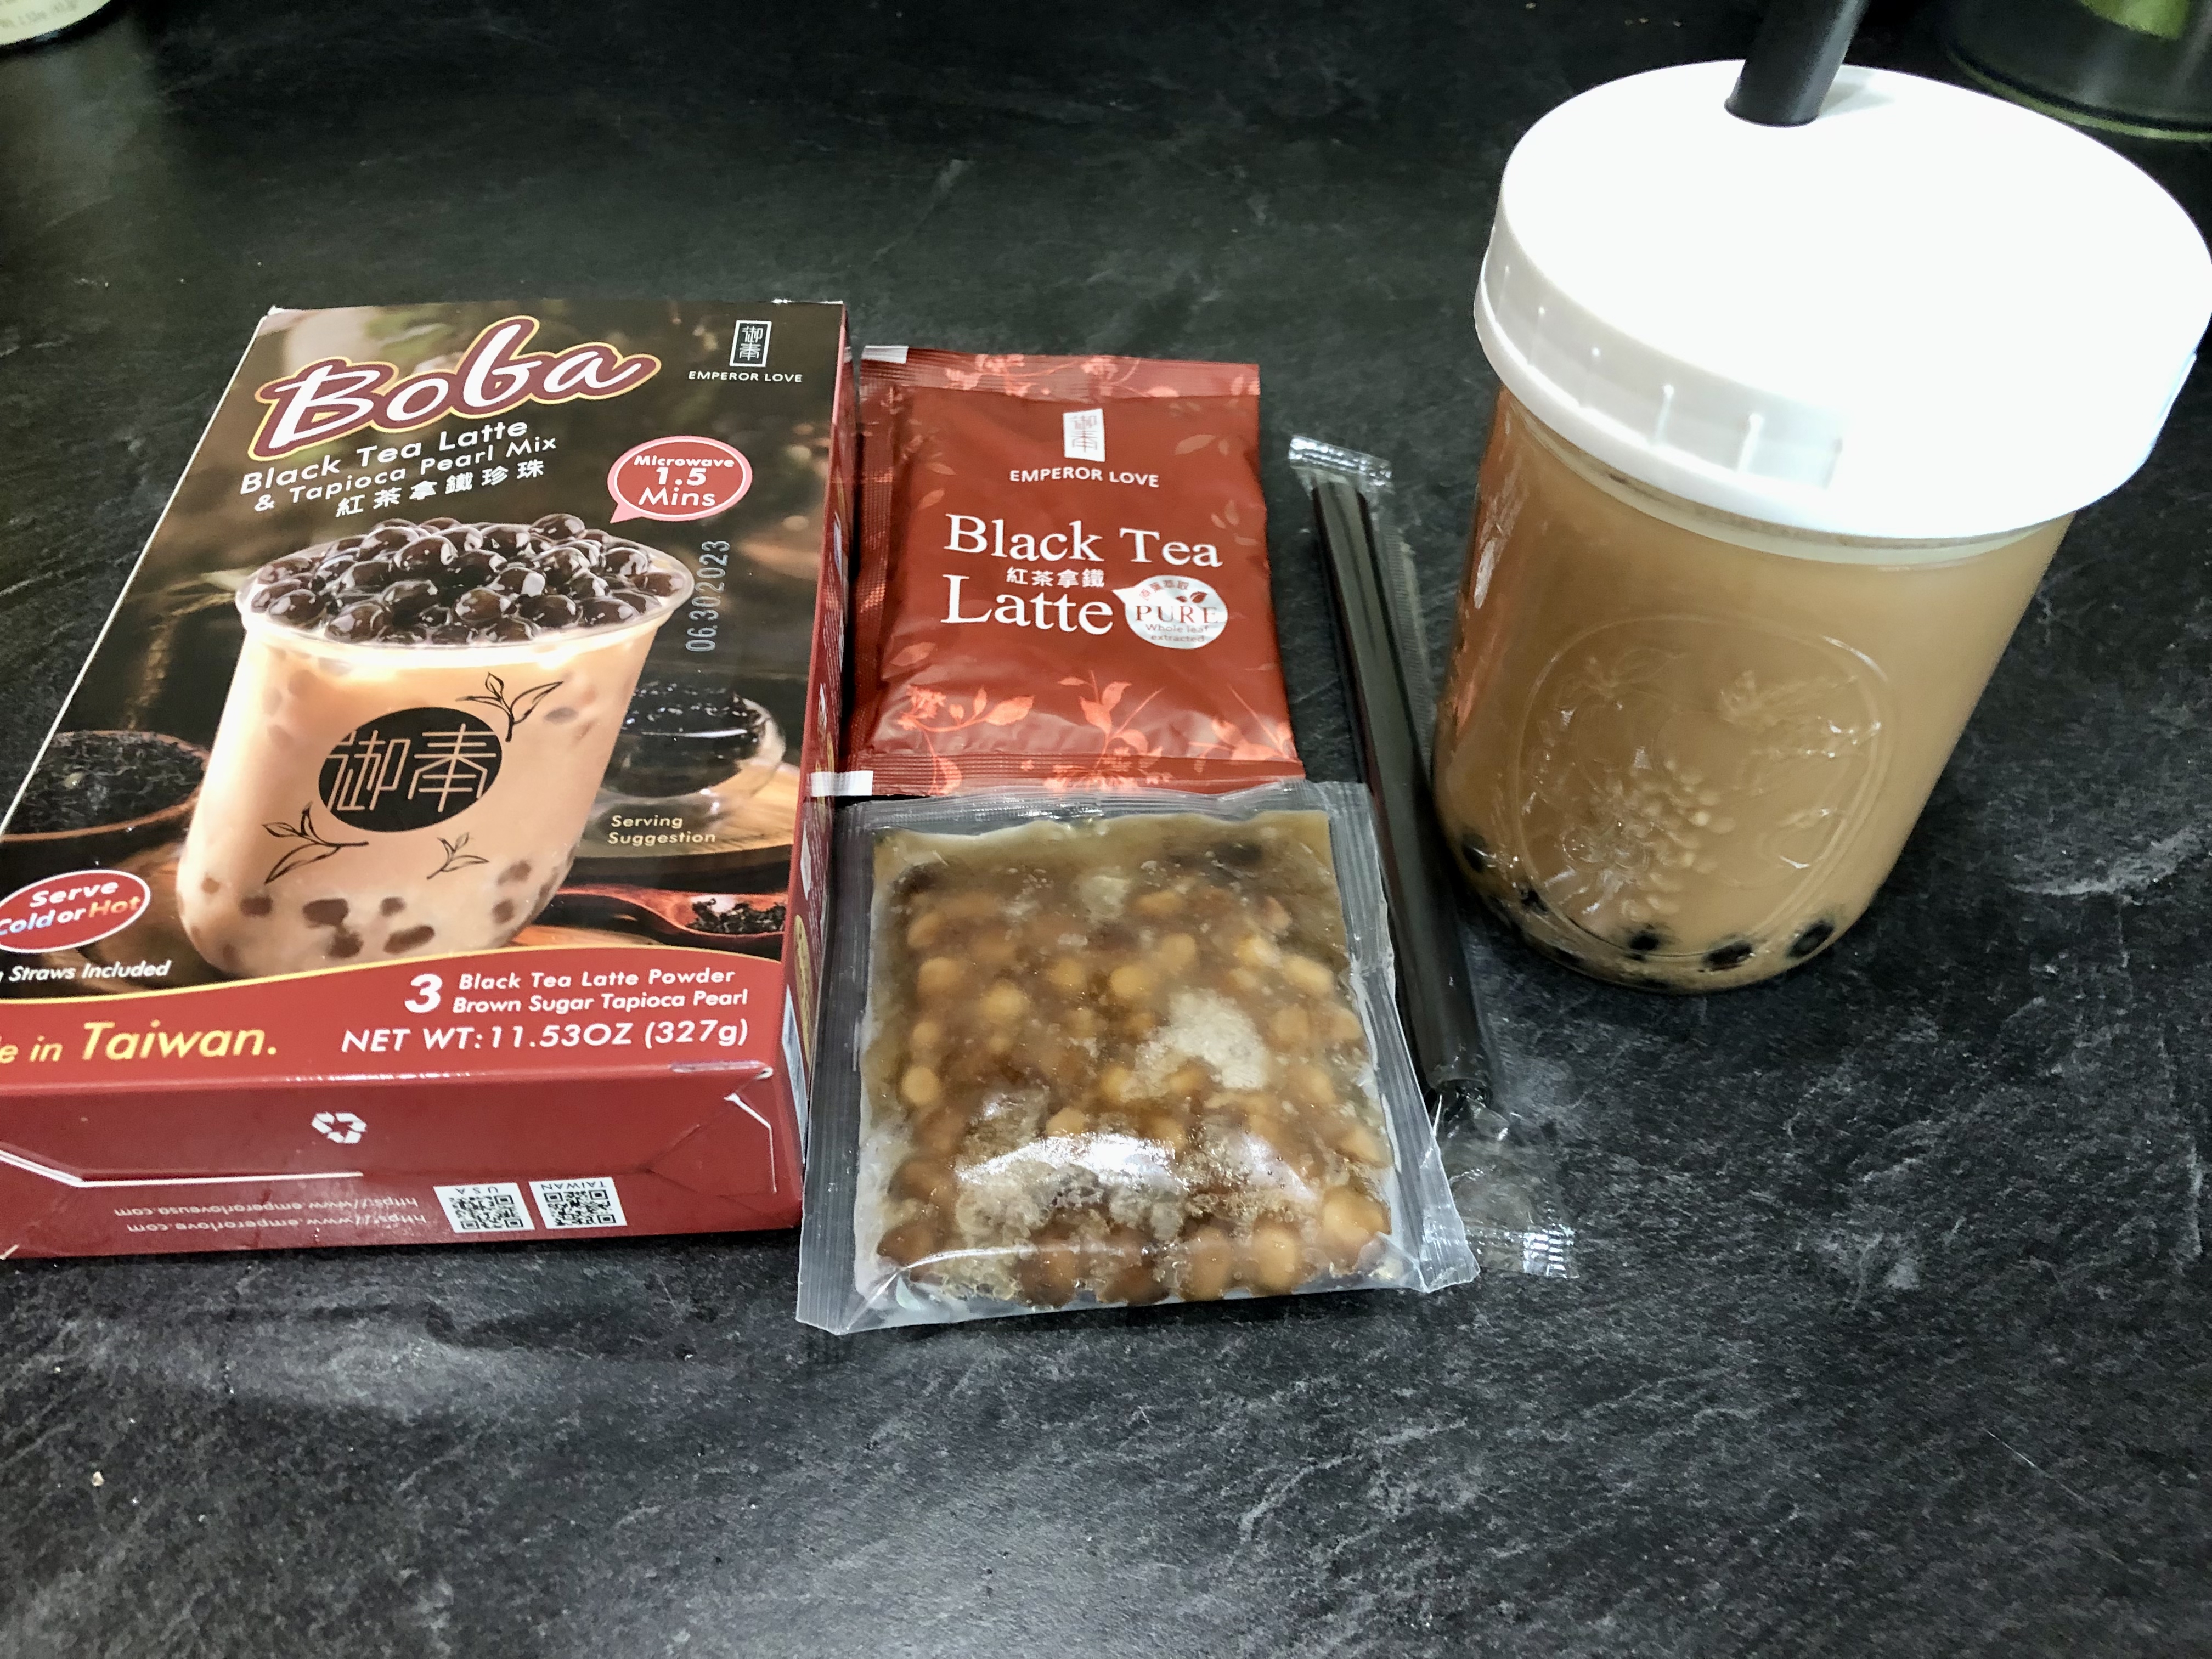 An opened package of the black tea latte and tapicoa pearl mix. Photo by Xiaohui Zhang.